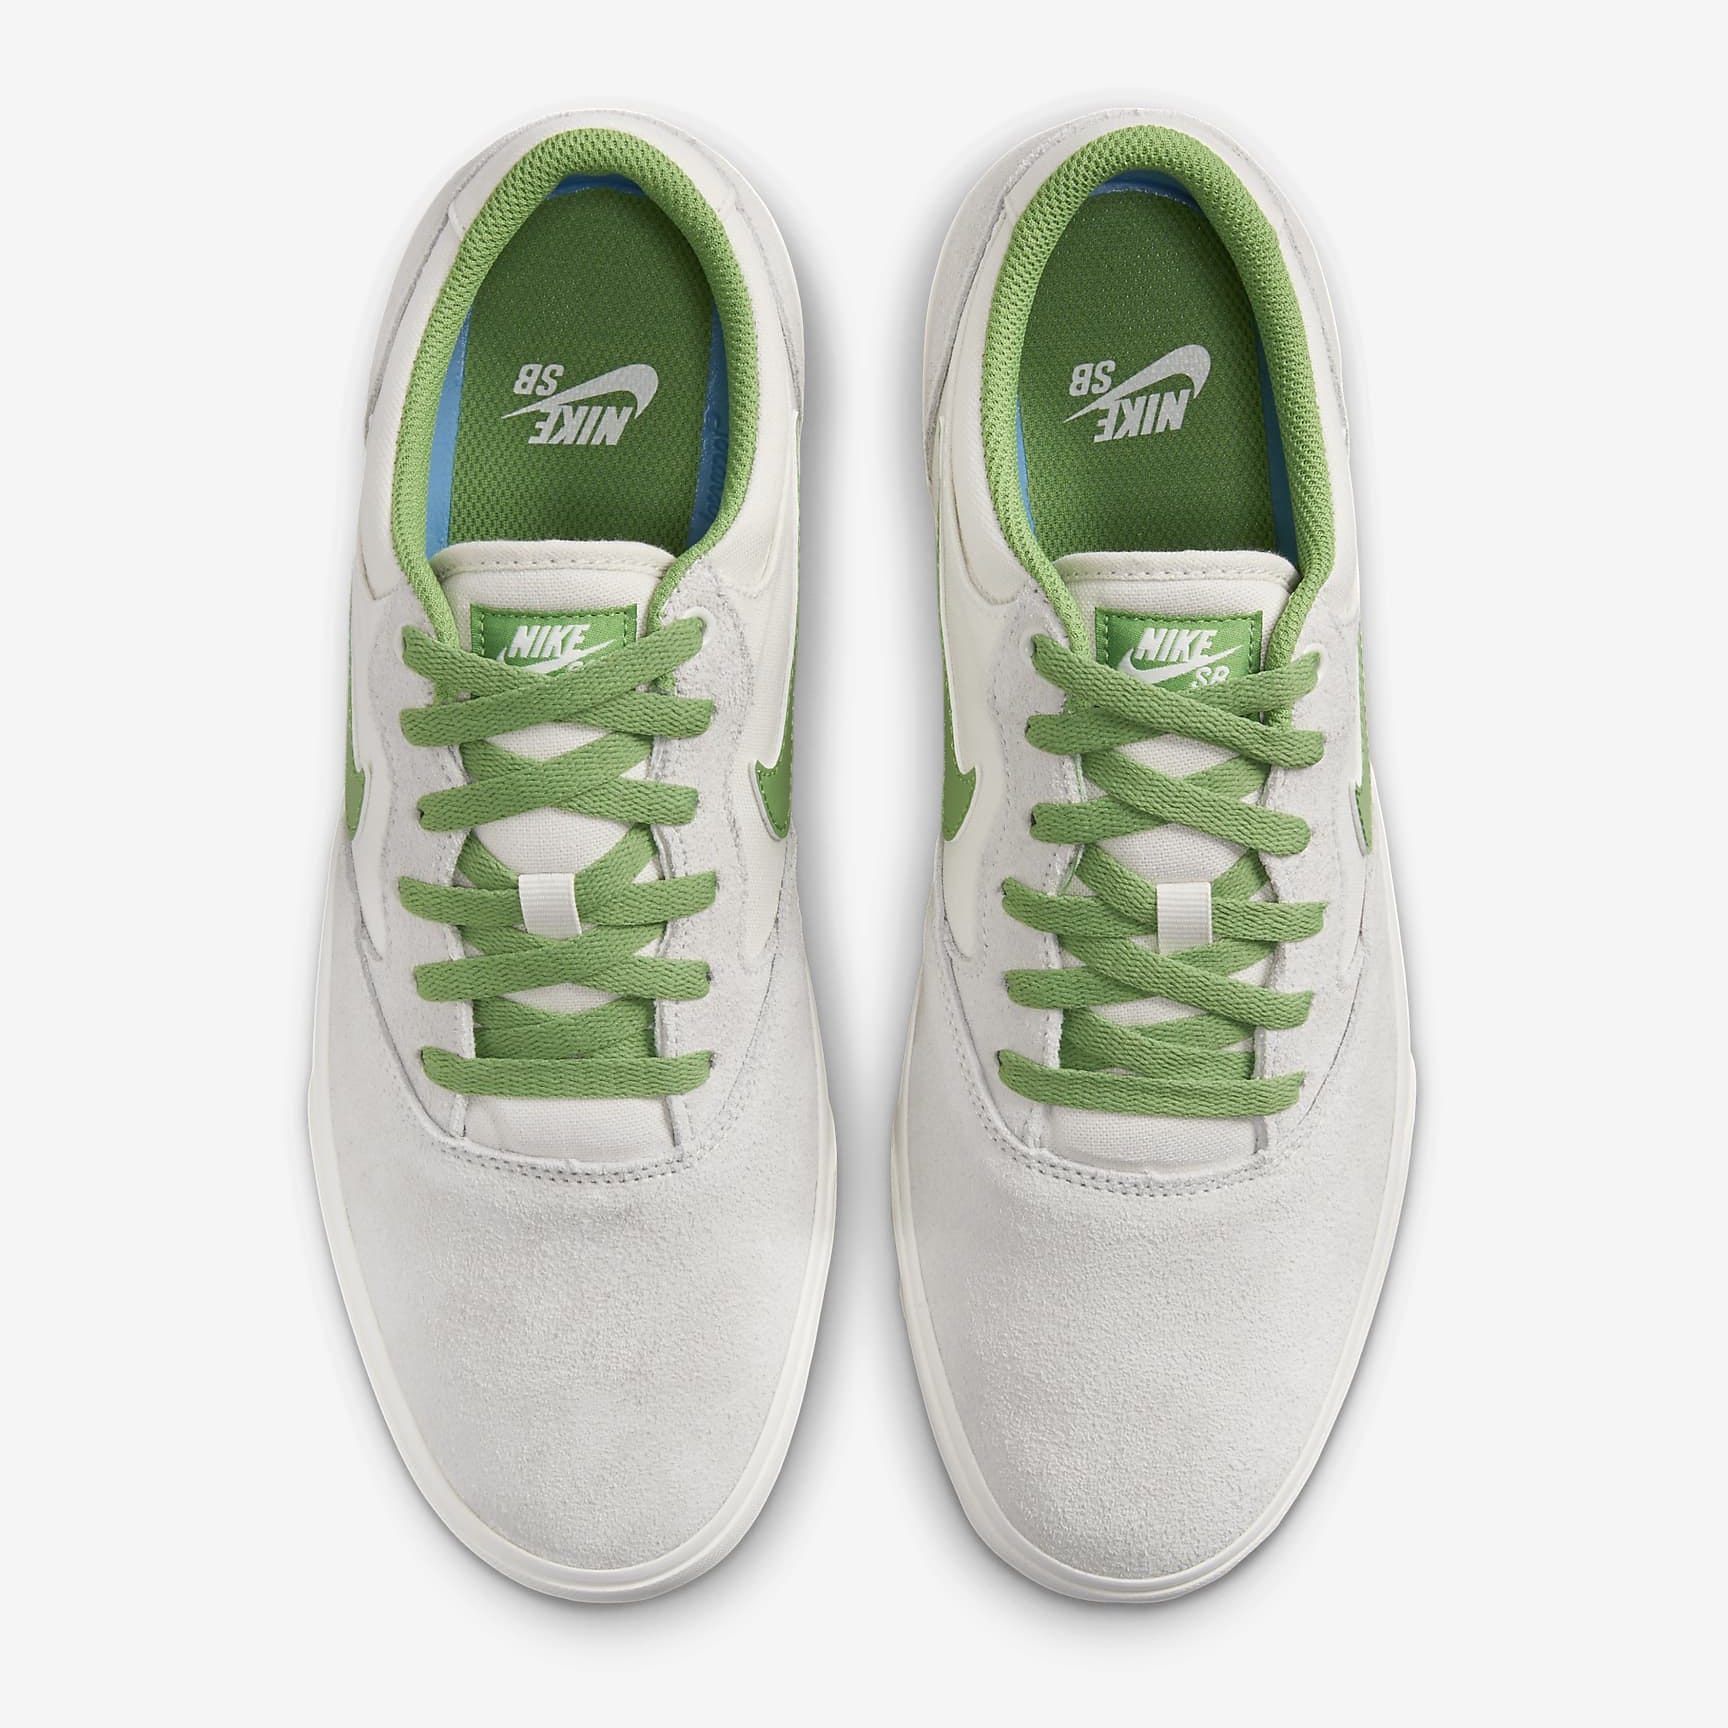 A pair of white sneakers with green laces and green Nike logo accents.